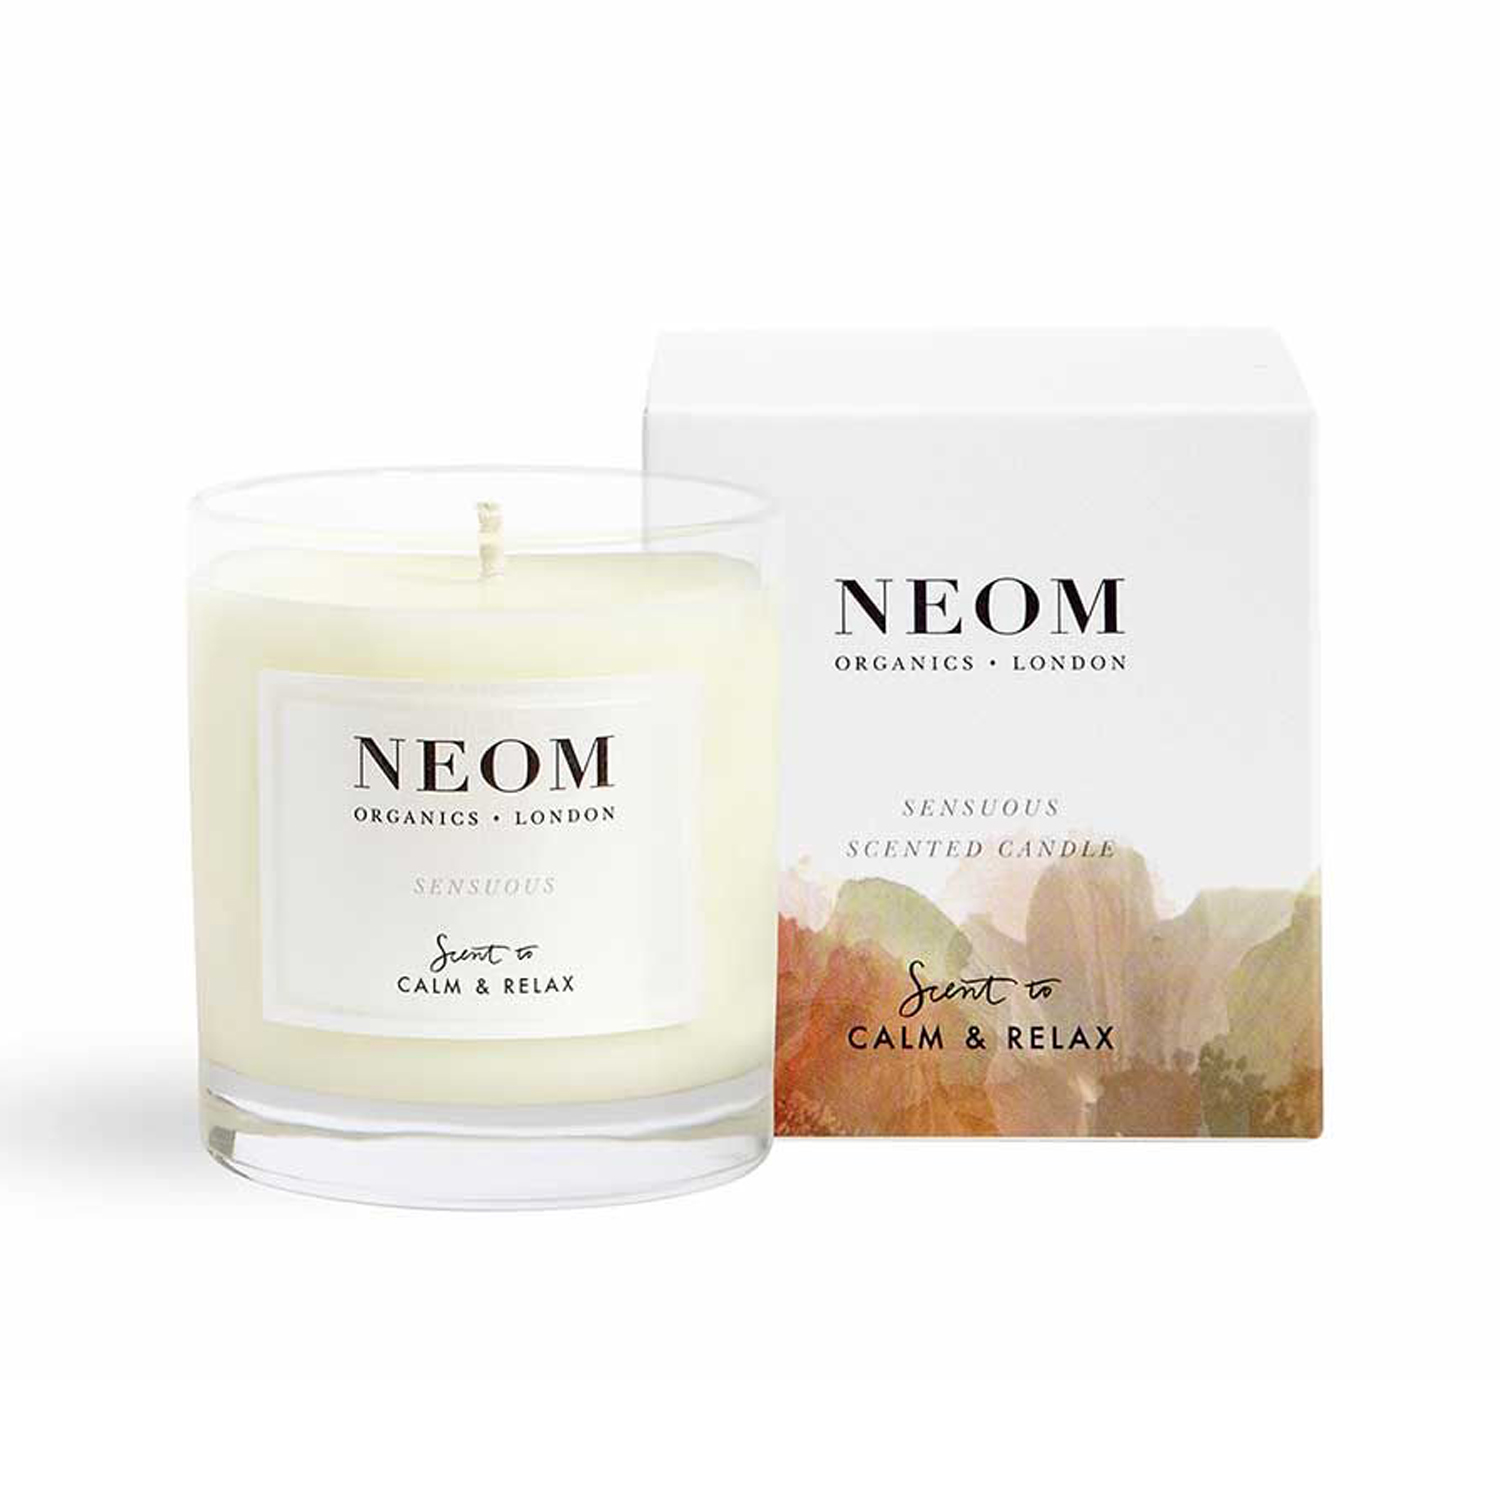 Neom Organics London Sensuous 1 Wick Scented Candle